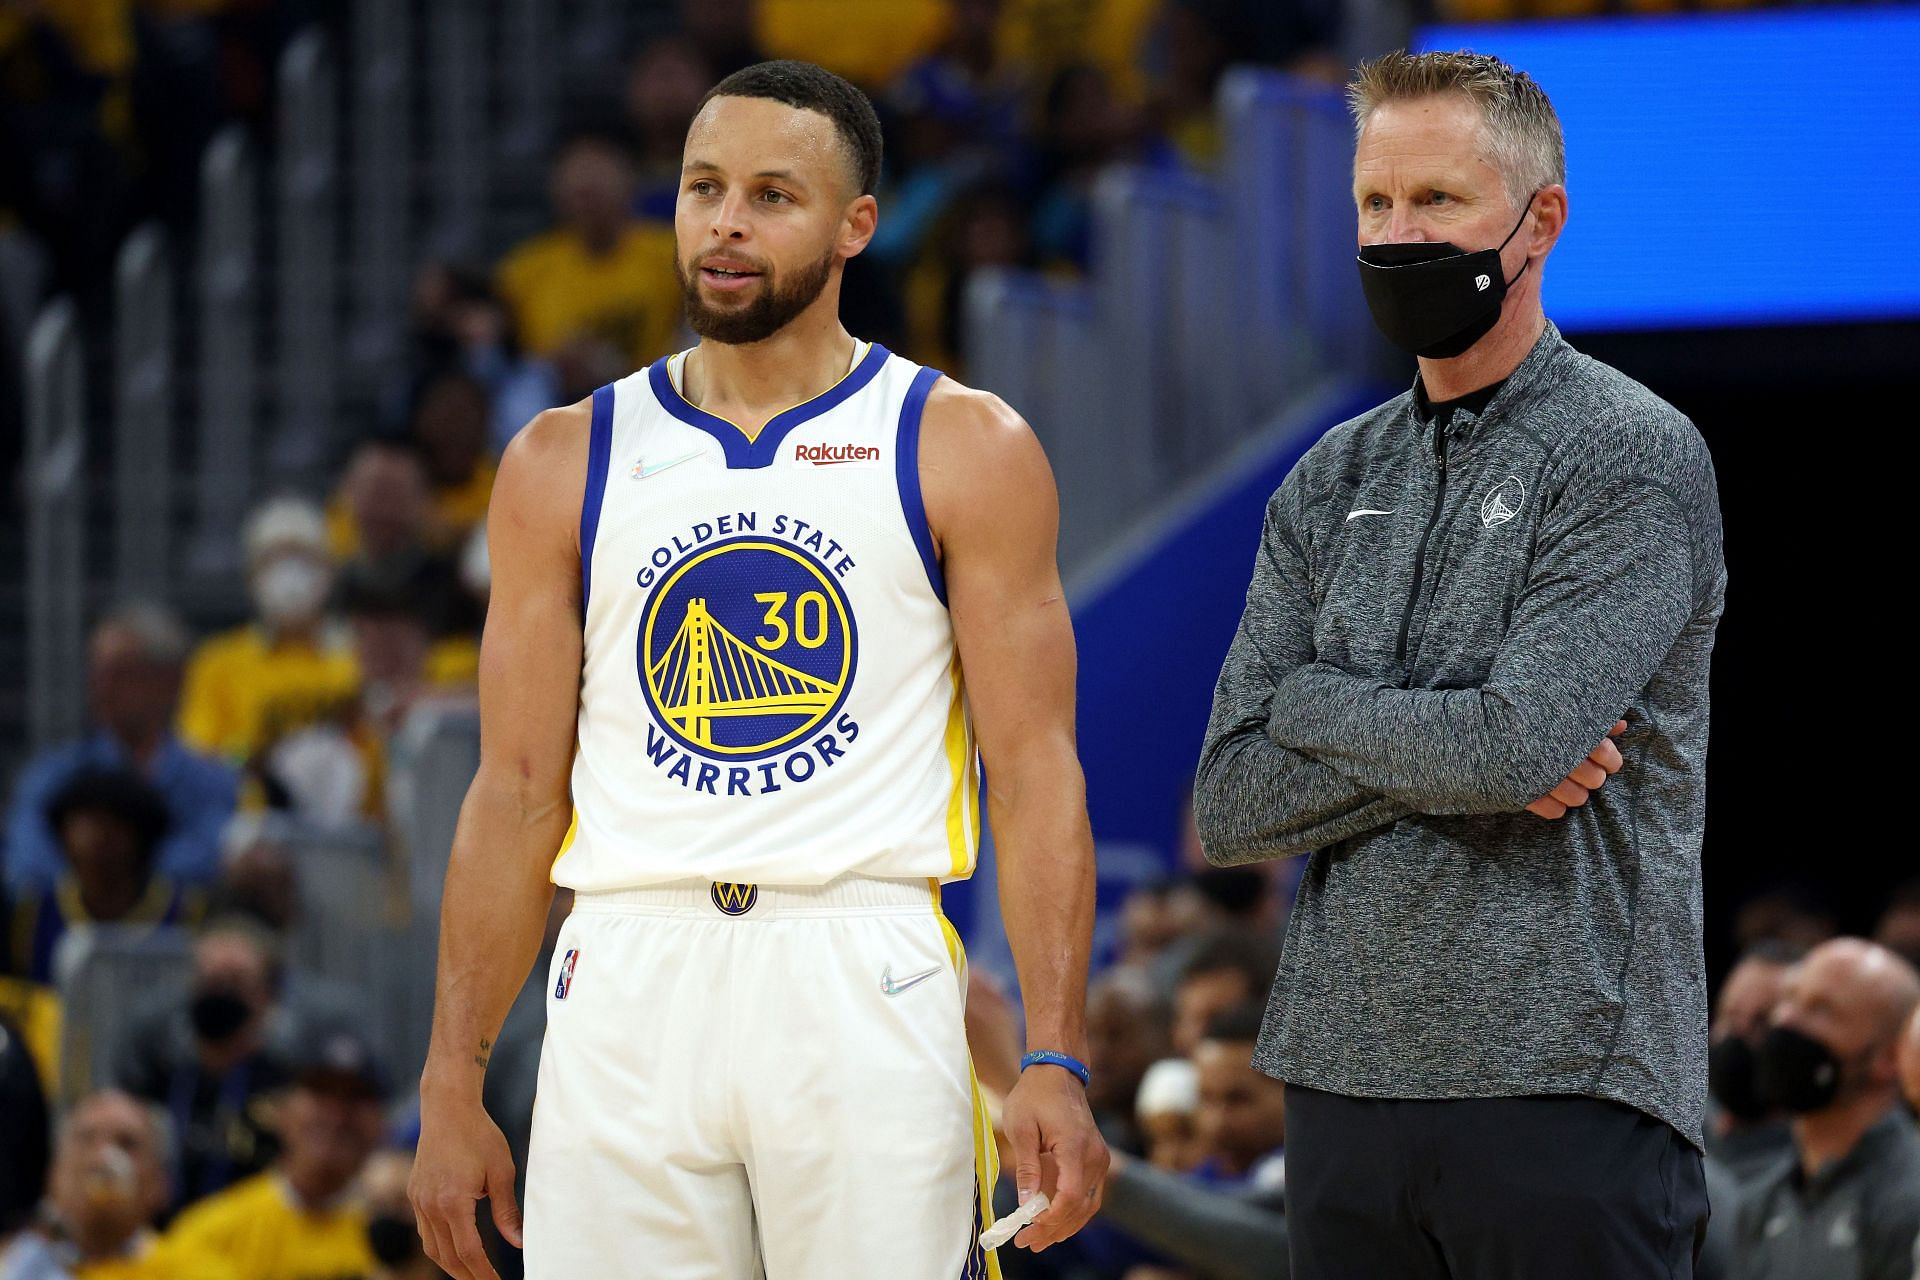 Steph Curry and Steve Kerr follow the model that led to the San Antonio Spurs dynasty.